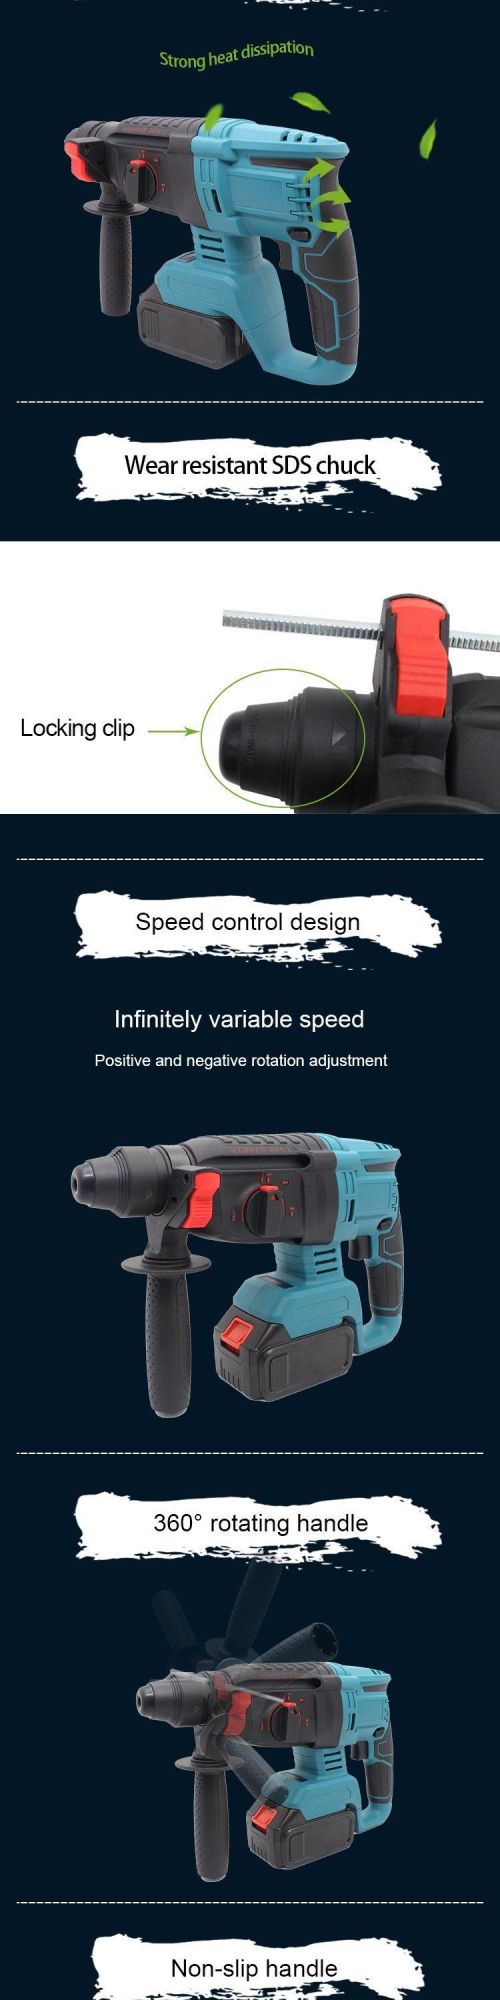 Factory Price Professional Rotary Impact Cordless Brushless Hammer Drill